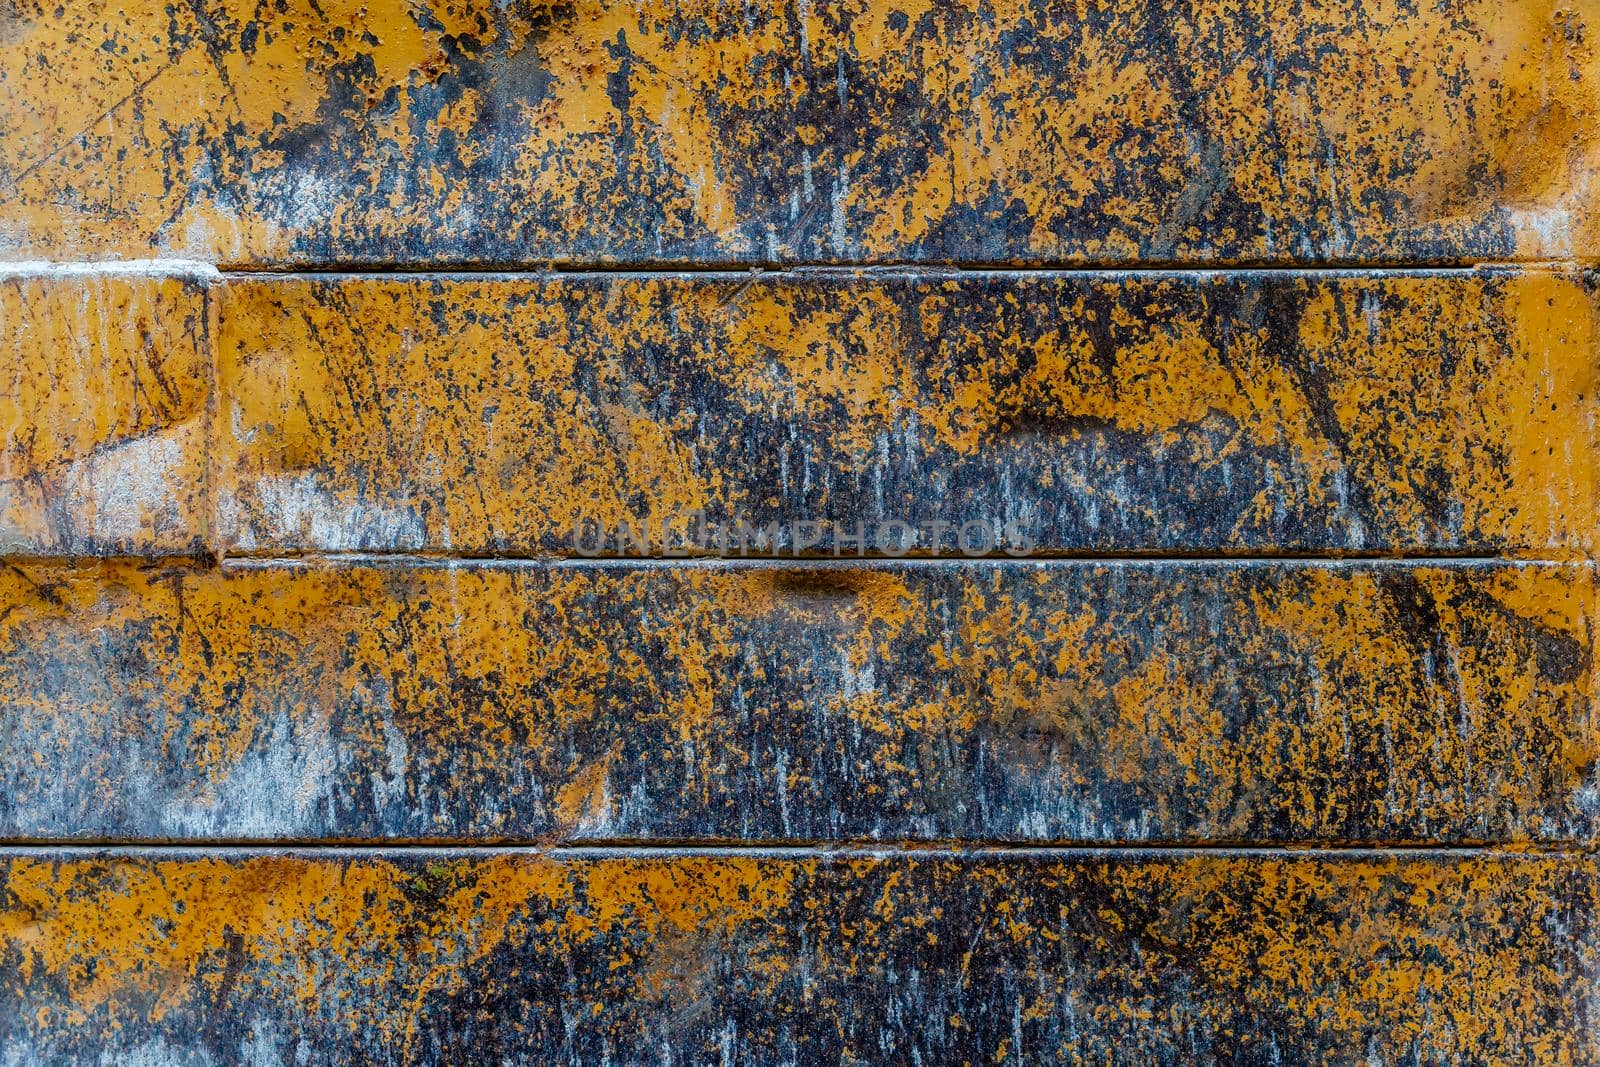 Grunge rusty metal texture background with patches of old yellow paint